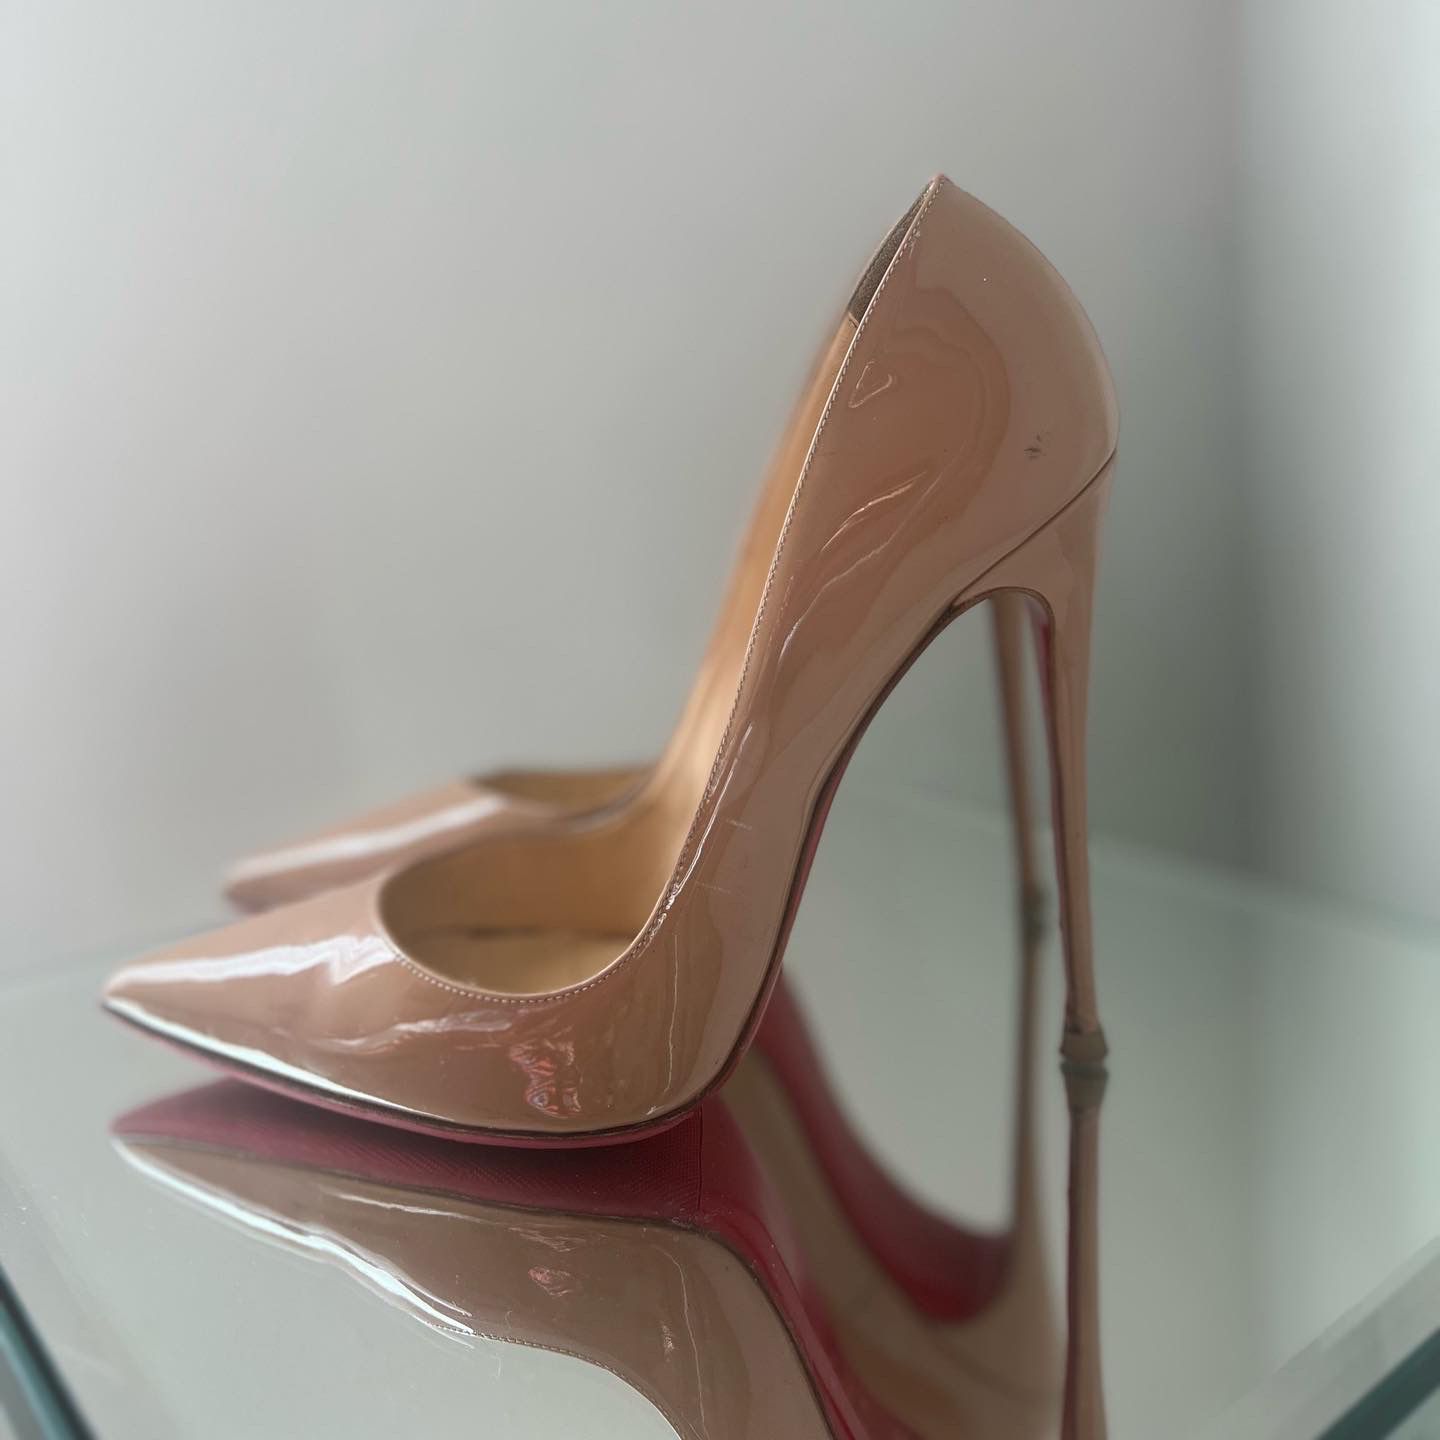 Christian Louboutin So Kate 120 mm – Shoes Post